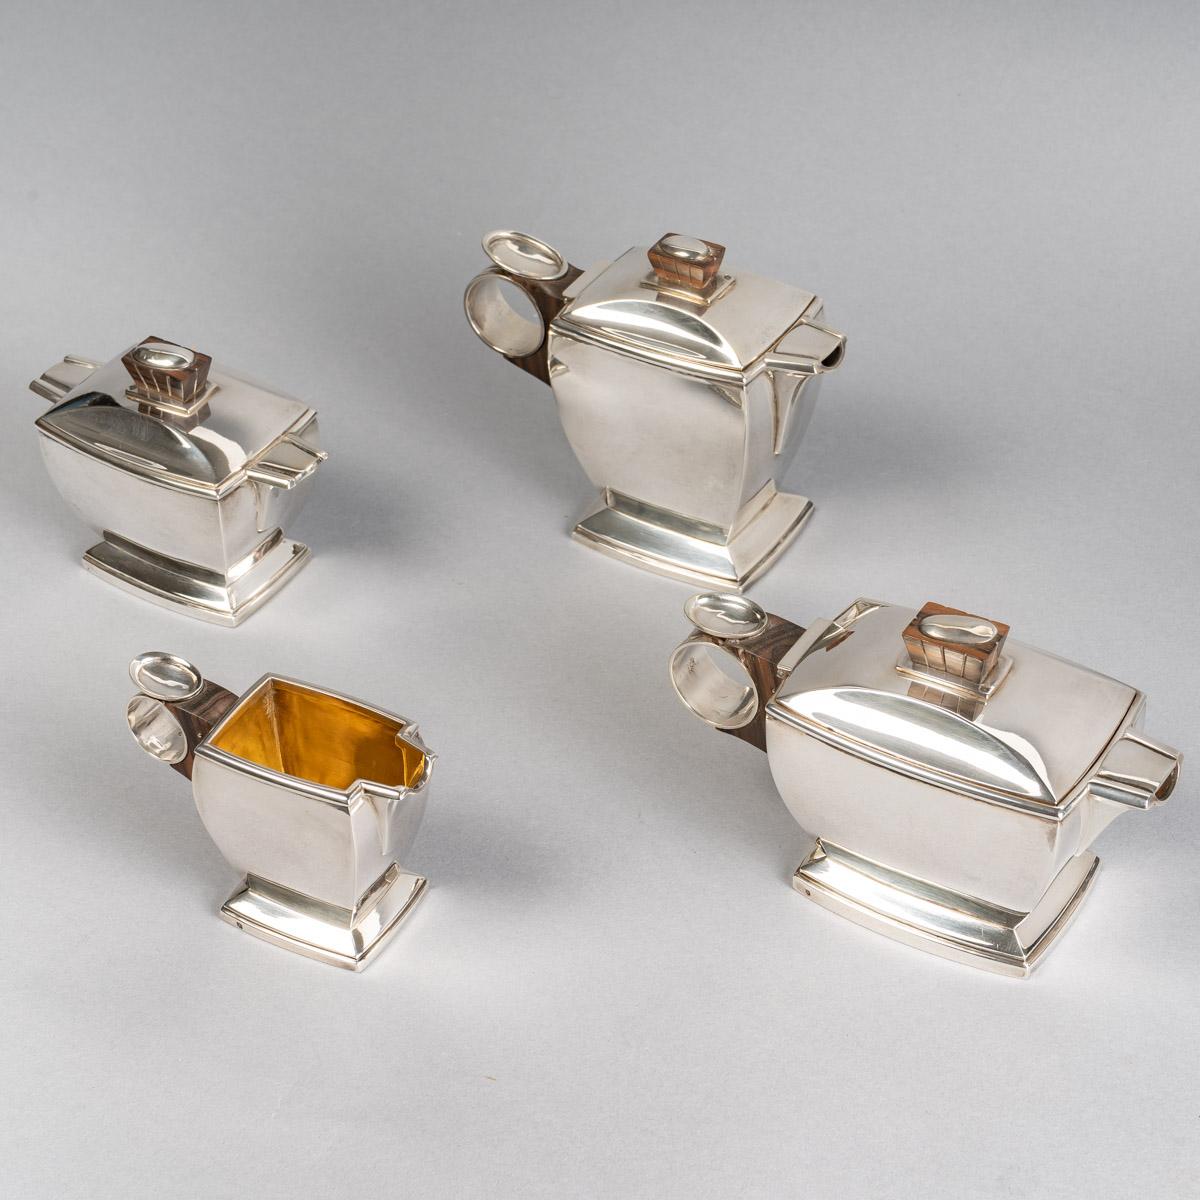 Art Deco 1920 Boin Taburet - Tea And Coffee Egoiste Set In Sterling Silver And Macassar For Sale